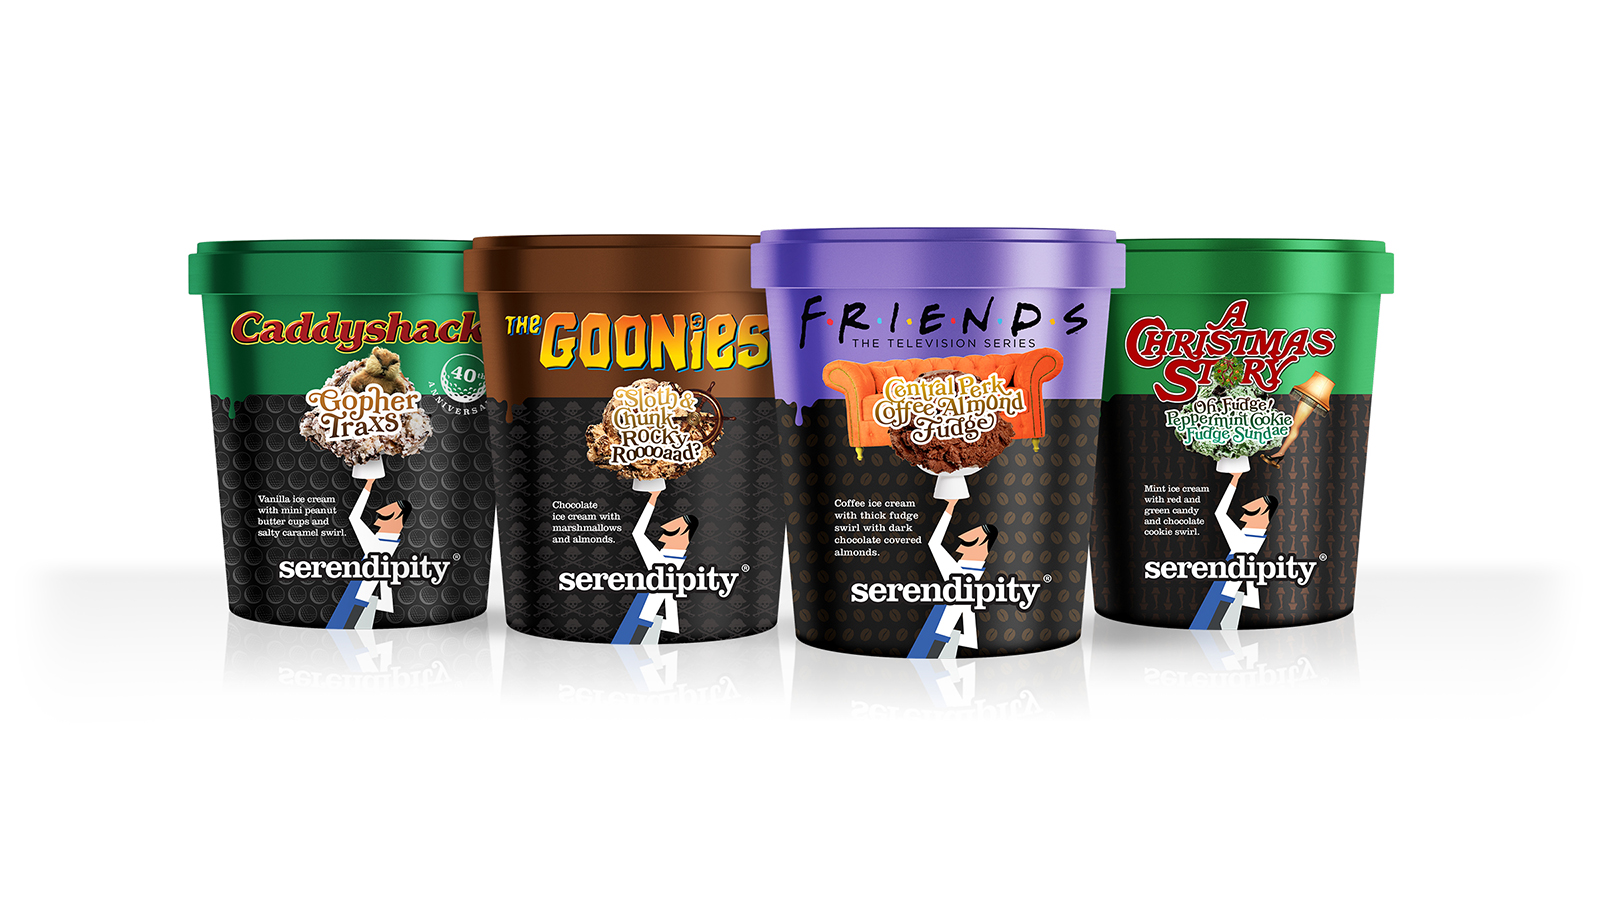 Pop Culture inspired ice creams from Serendipity Brands